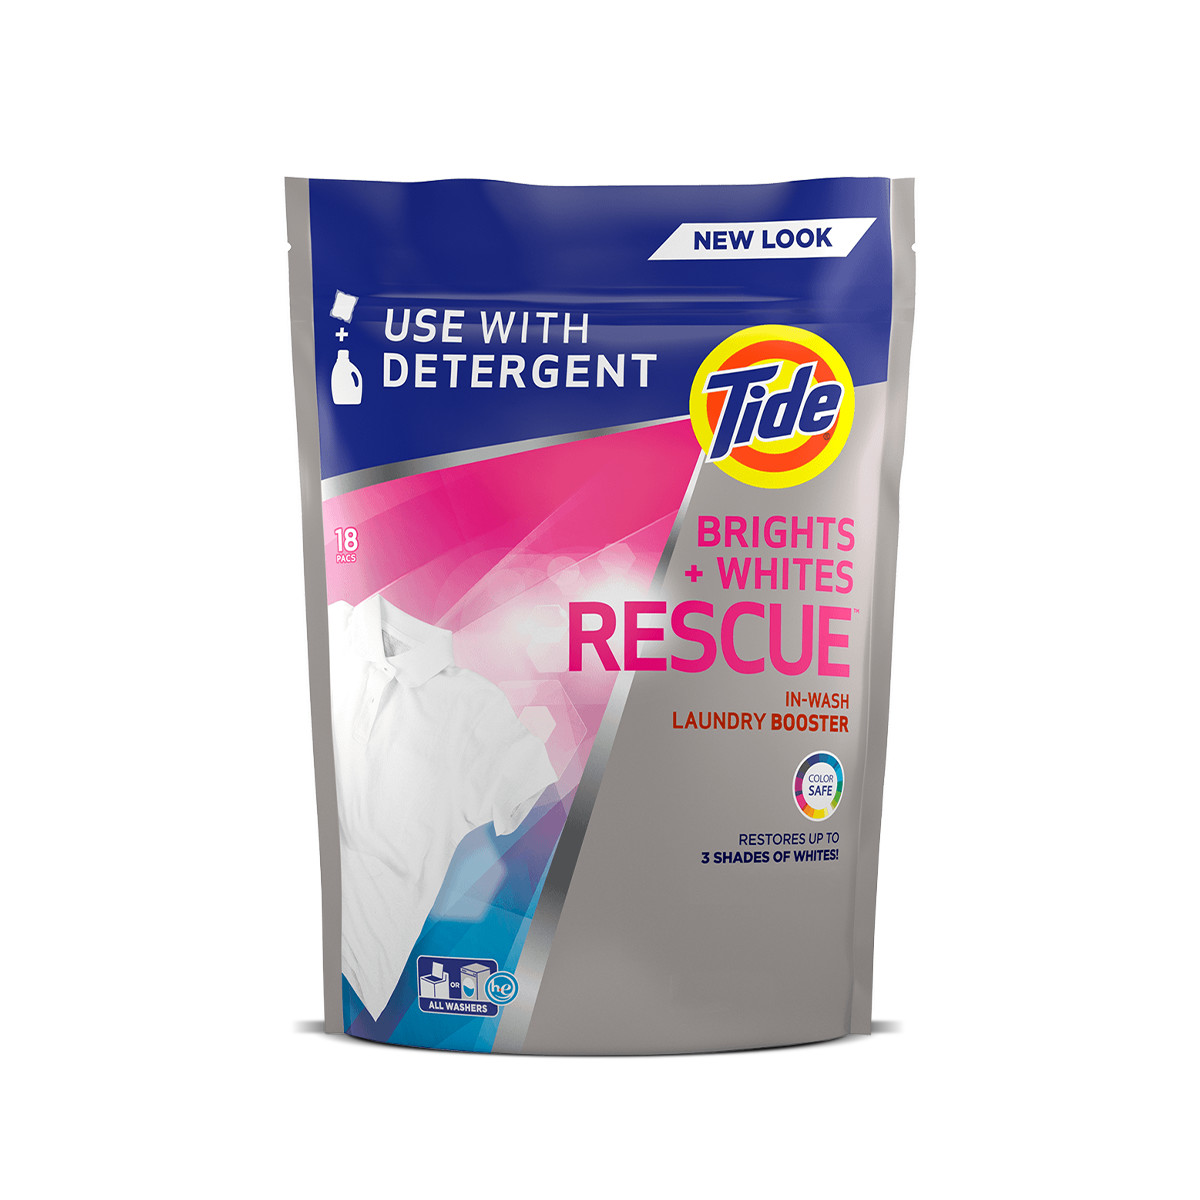 Tide Brights + Whites Rescue™ - 18 count, color gray, pink, and blue